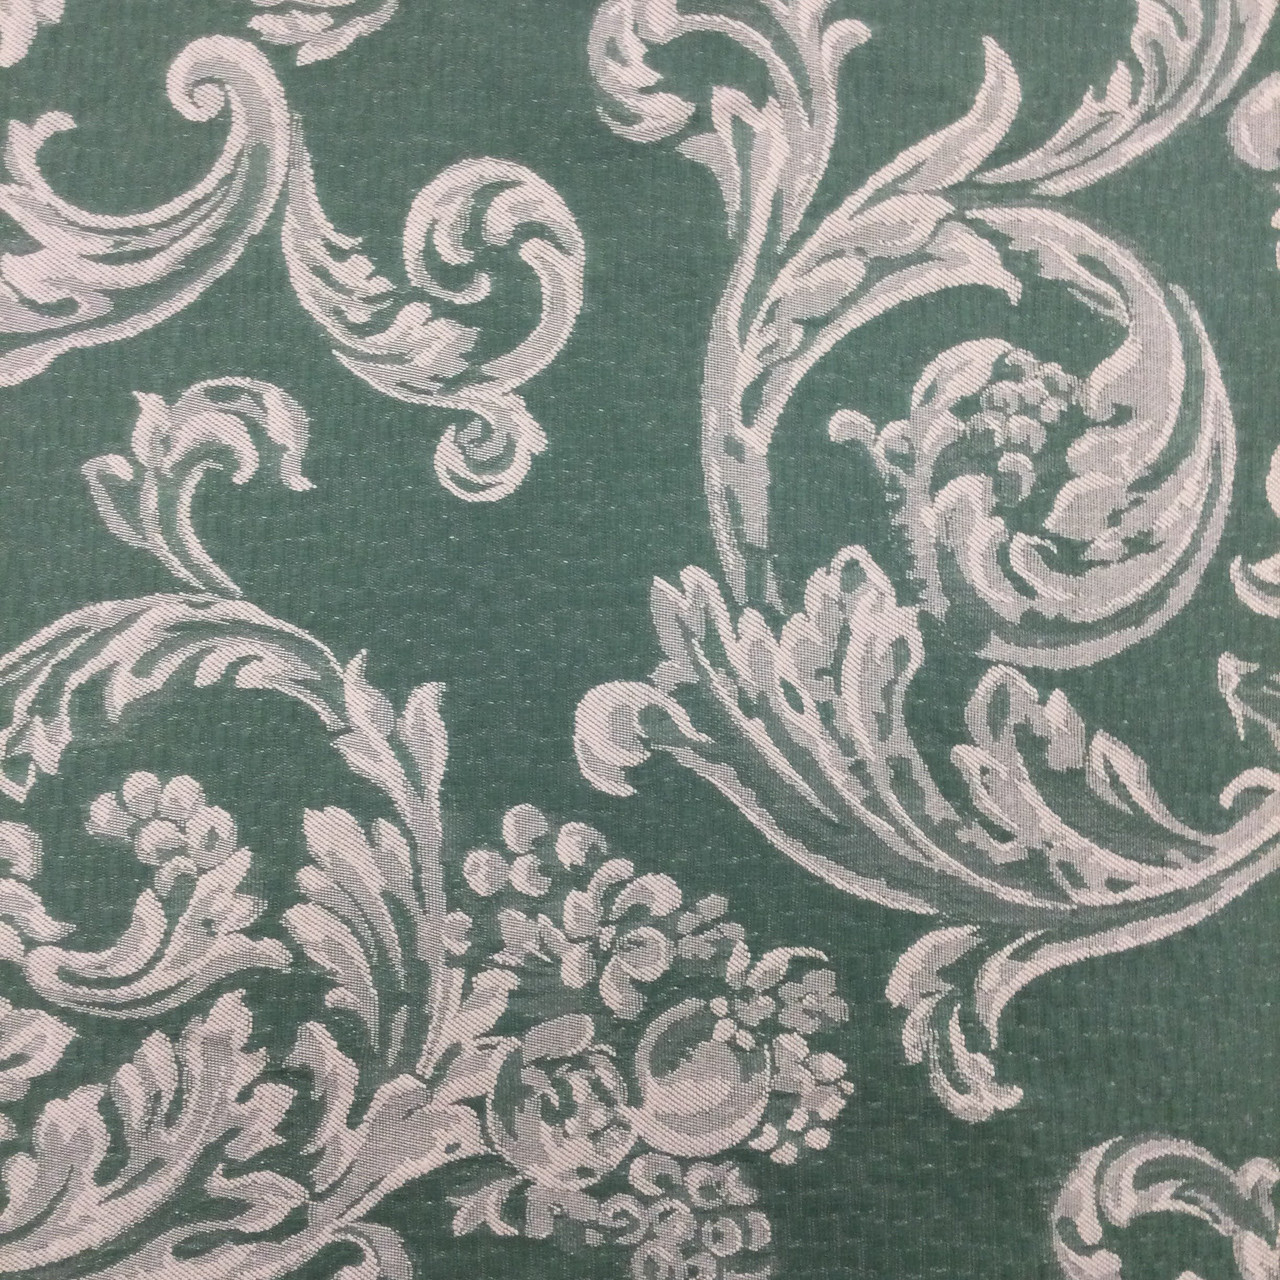 Damask Jacquard Fabric | Green / Off White | Upholstery / Slipcovers |  Medium Weight | 54 Wide | By the Yard